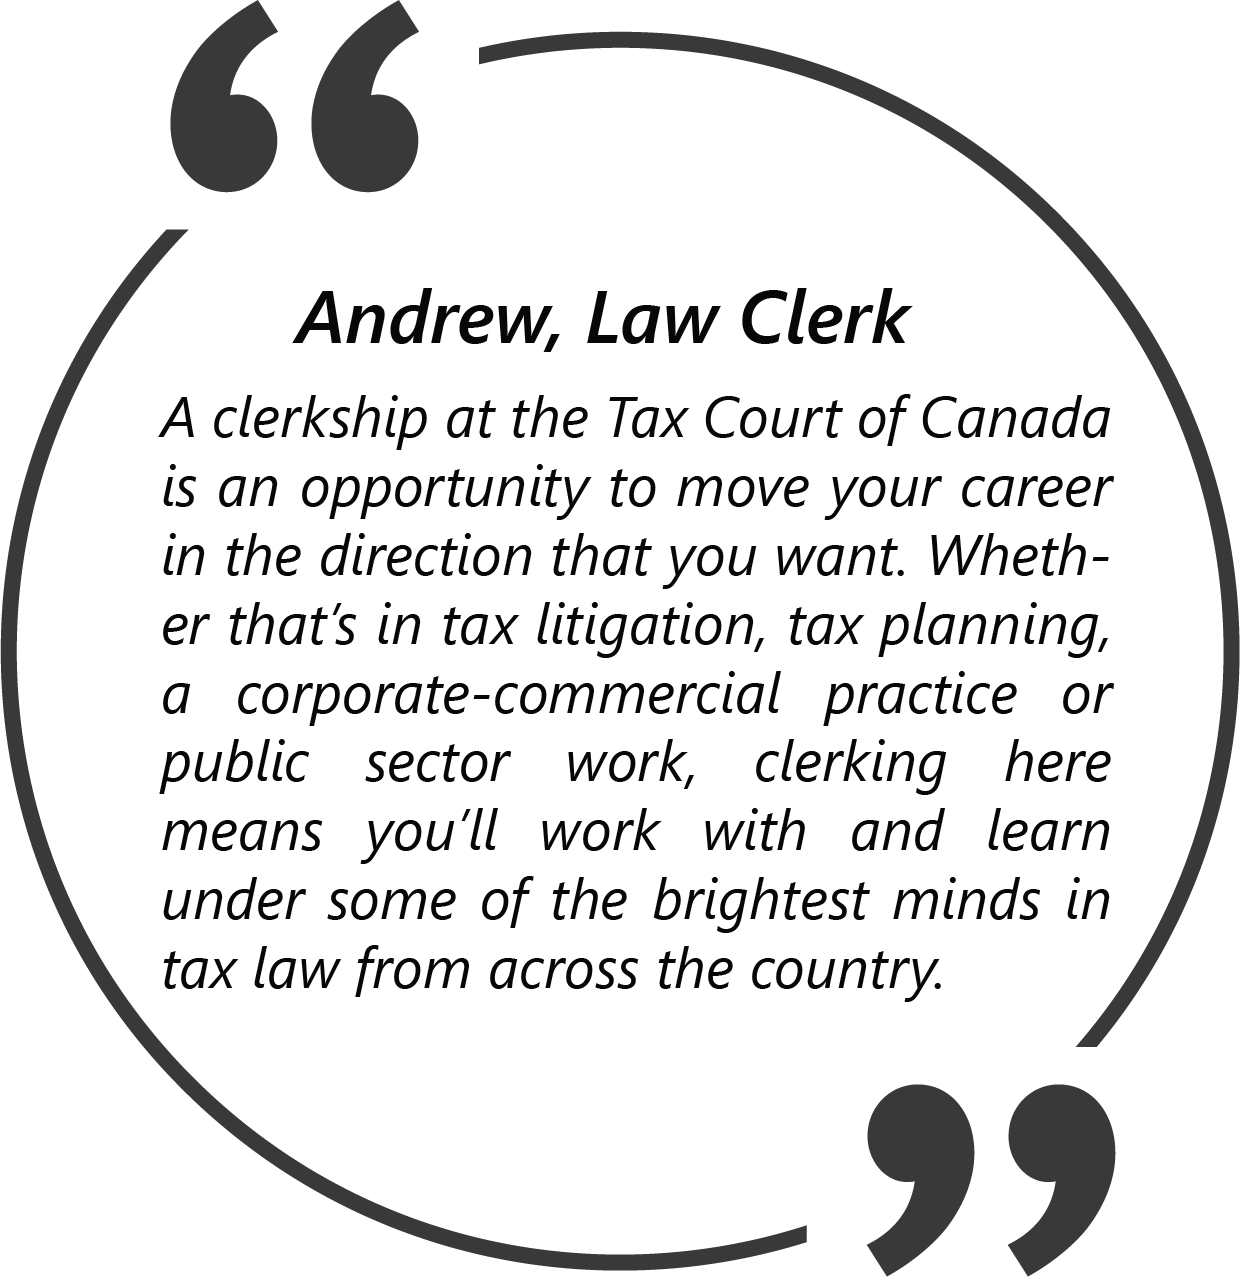 Quote from Andrew, Law Clerk